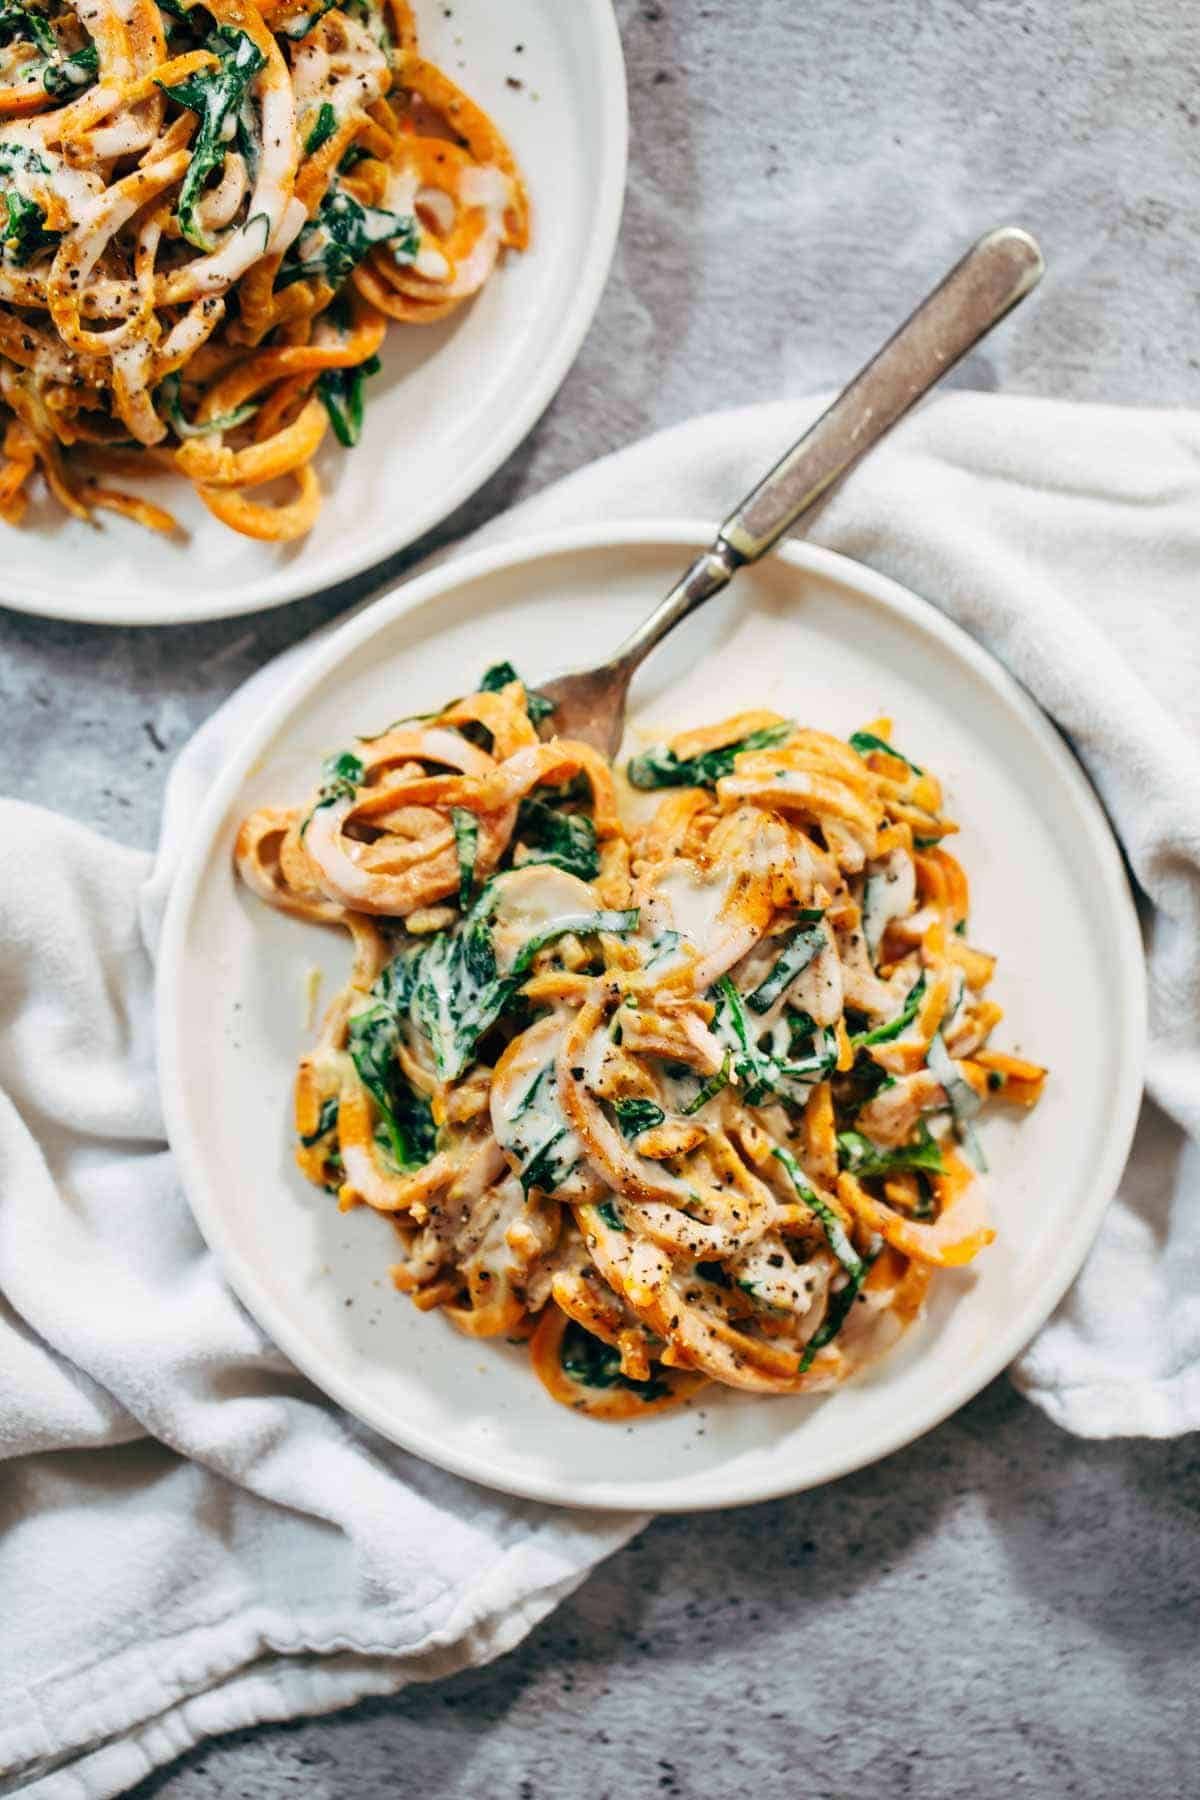 2 white plates of sweet potato noodles and spinach in a creamy sauce